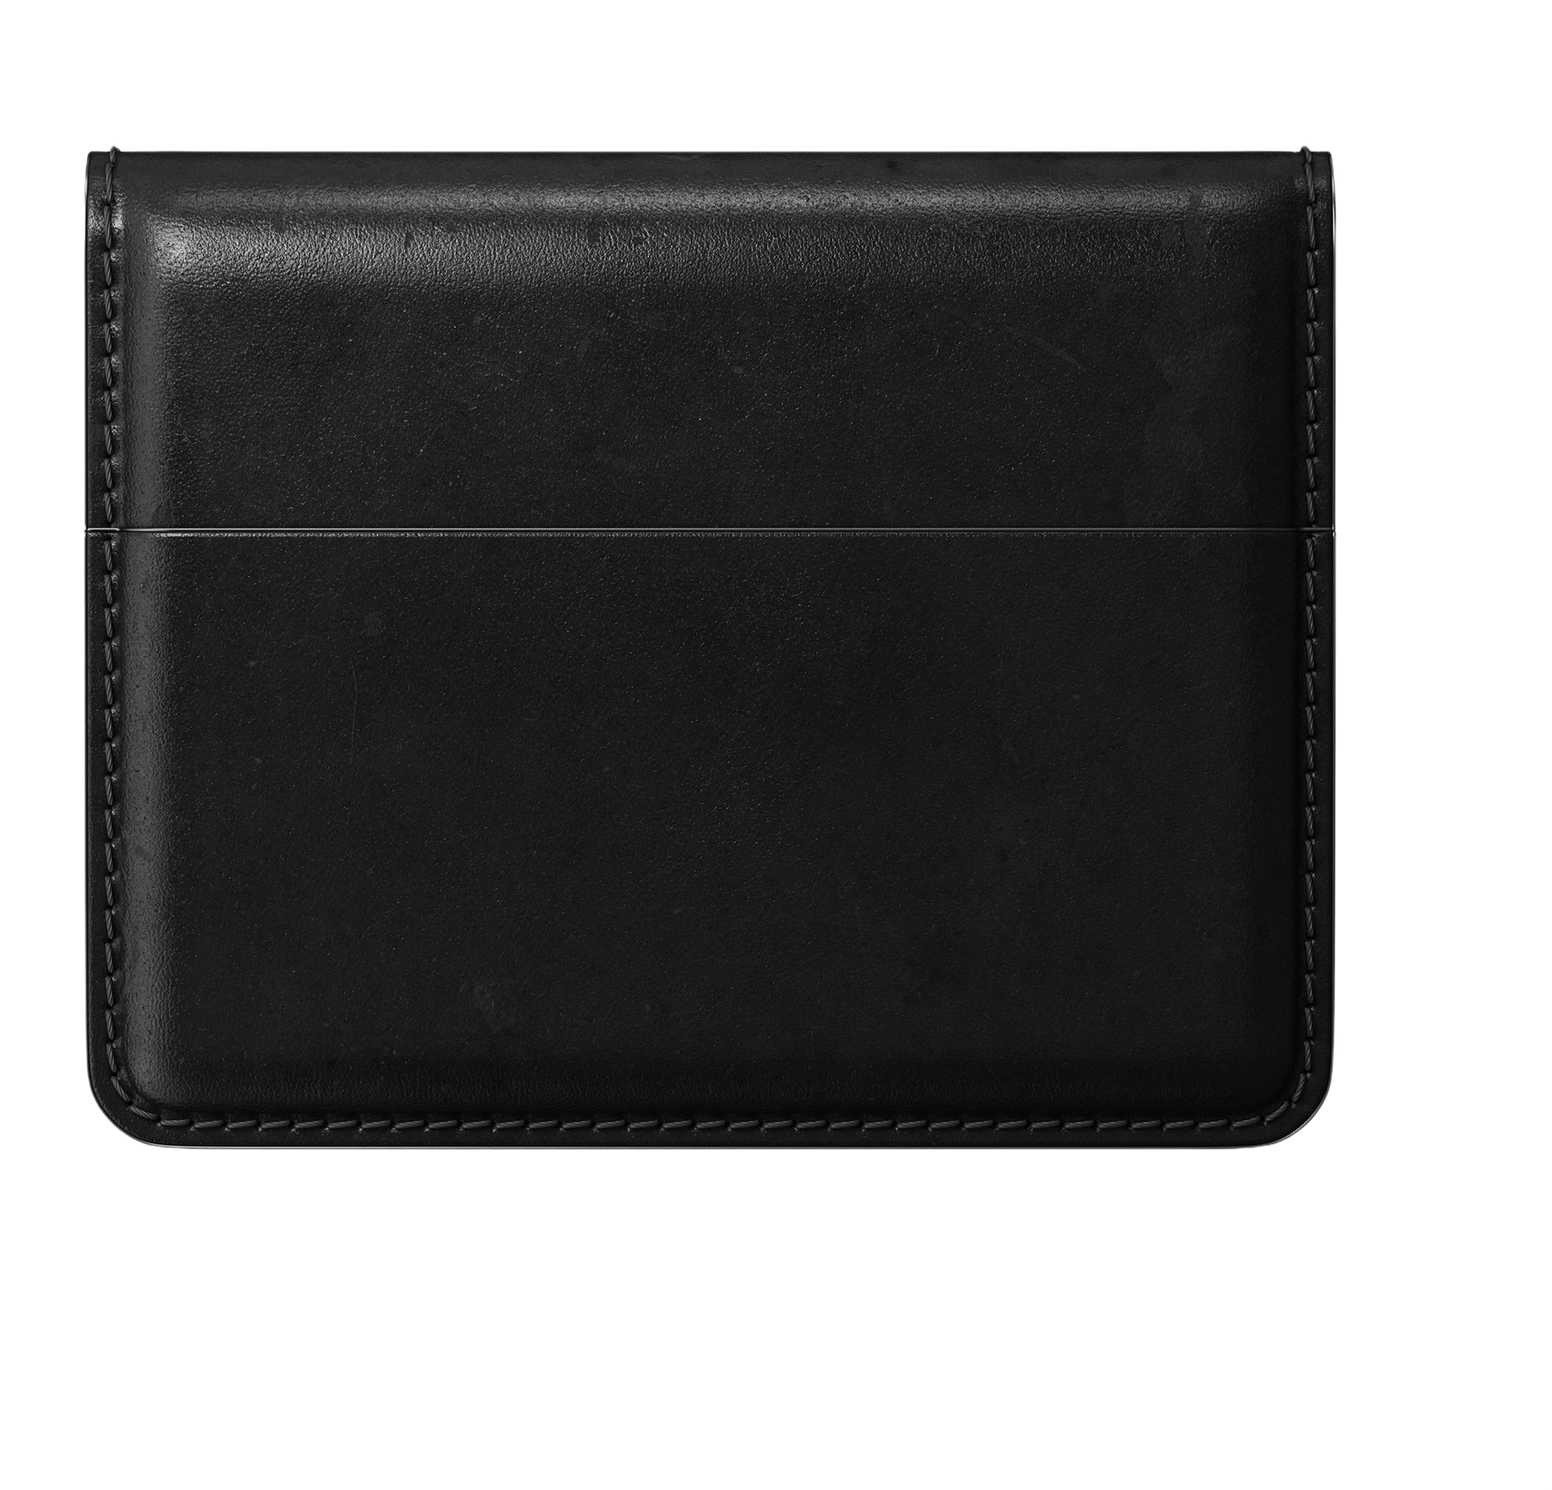 Nomad Card Wallet has thermoformed leather that creates space for